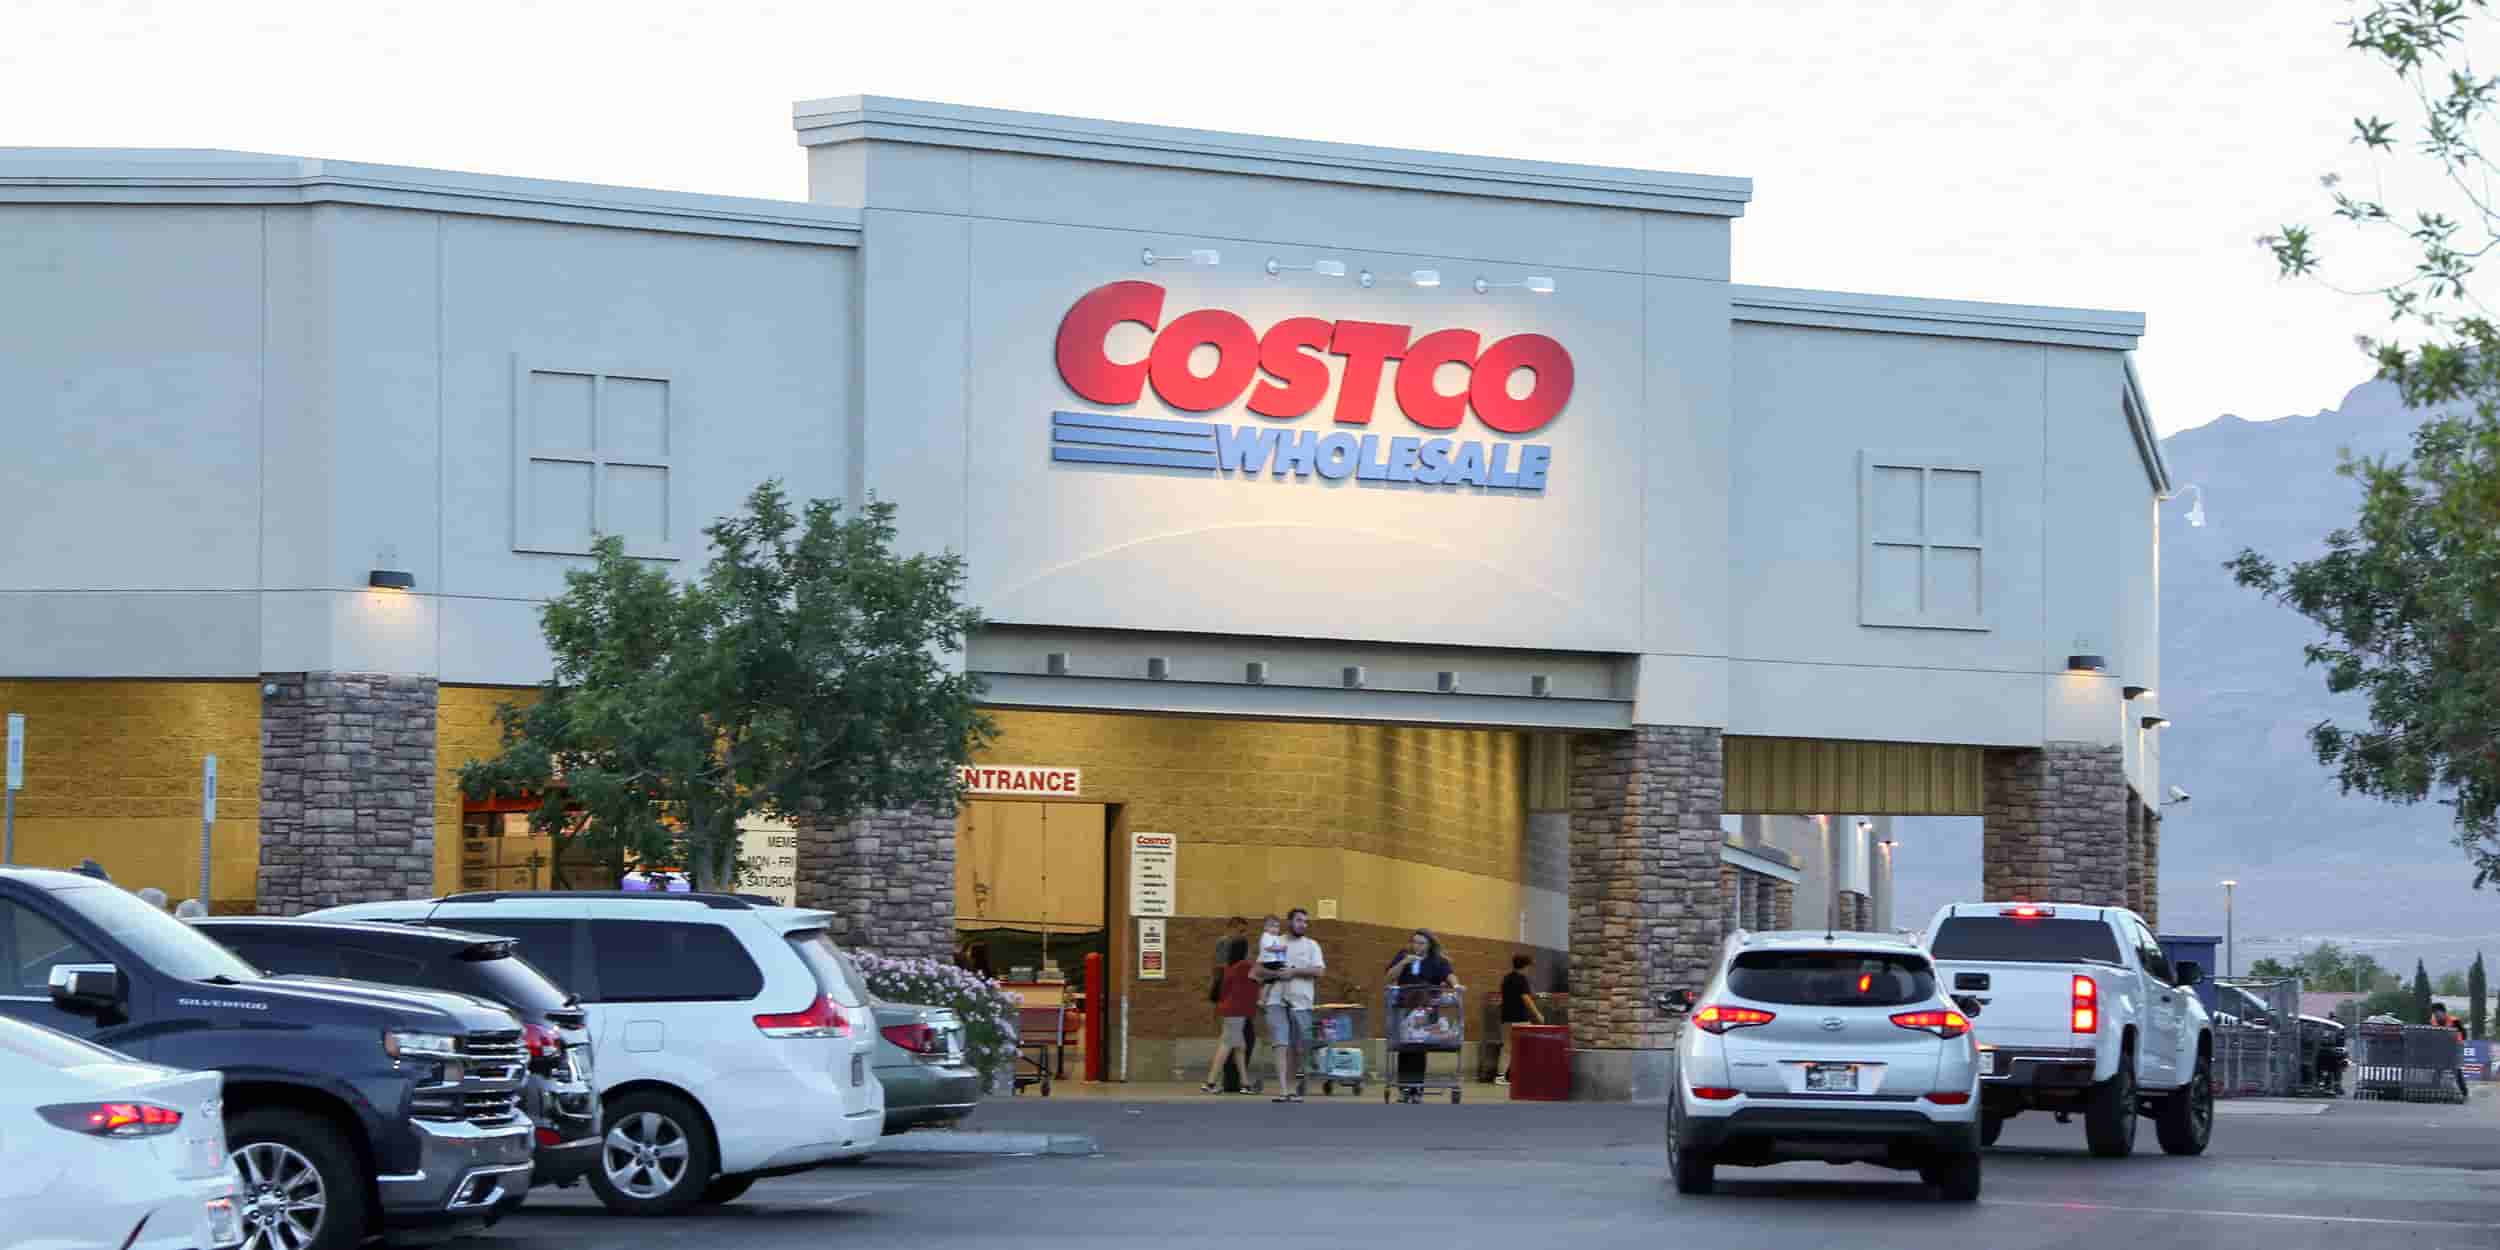 Some Costco Items may not be cost-effective when purchased in bulk.